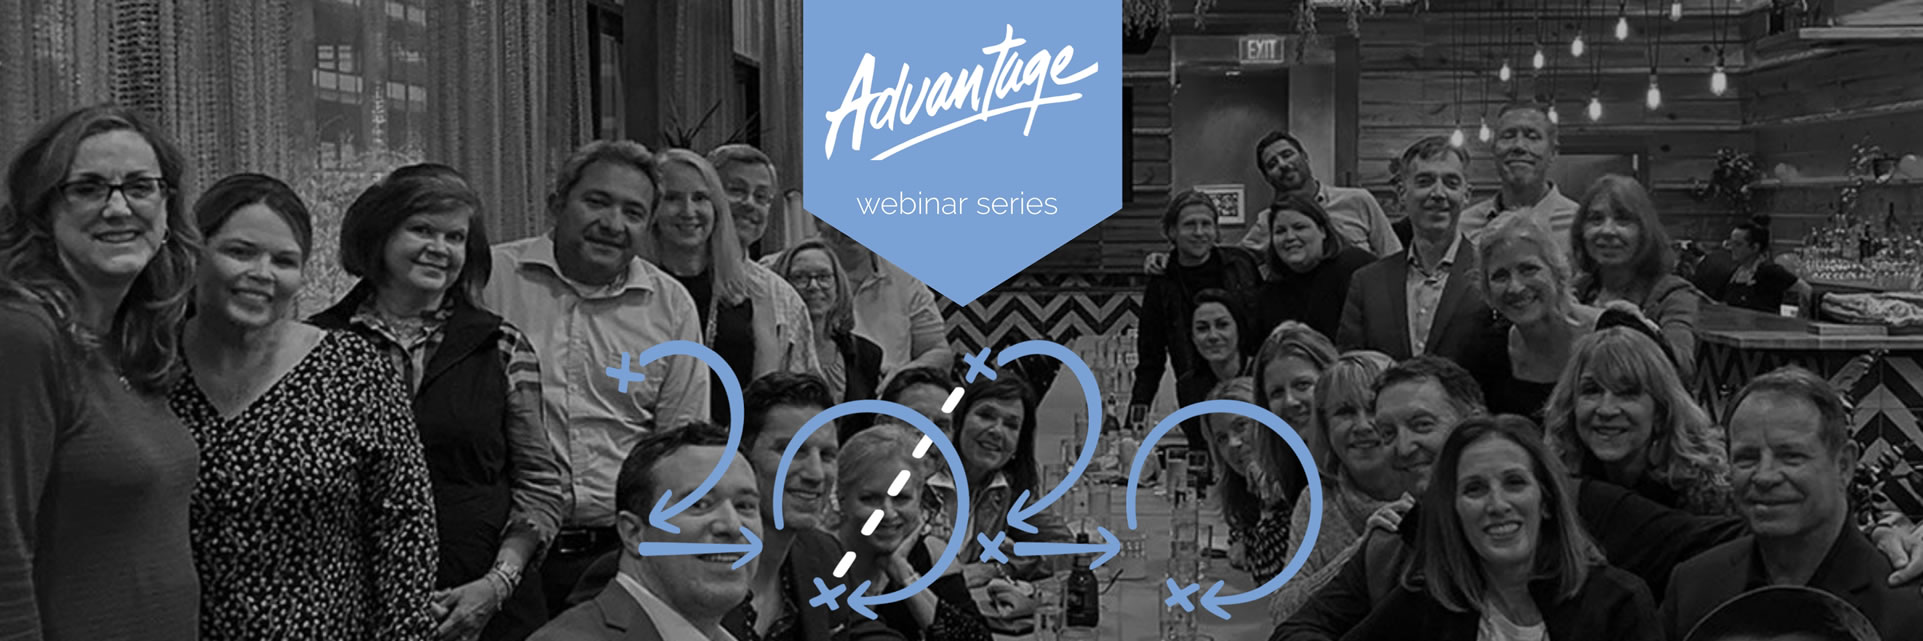 2020 Webinar Series: Pivoting Together in Challenging Times